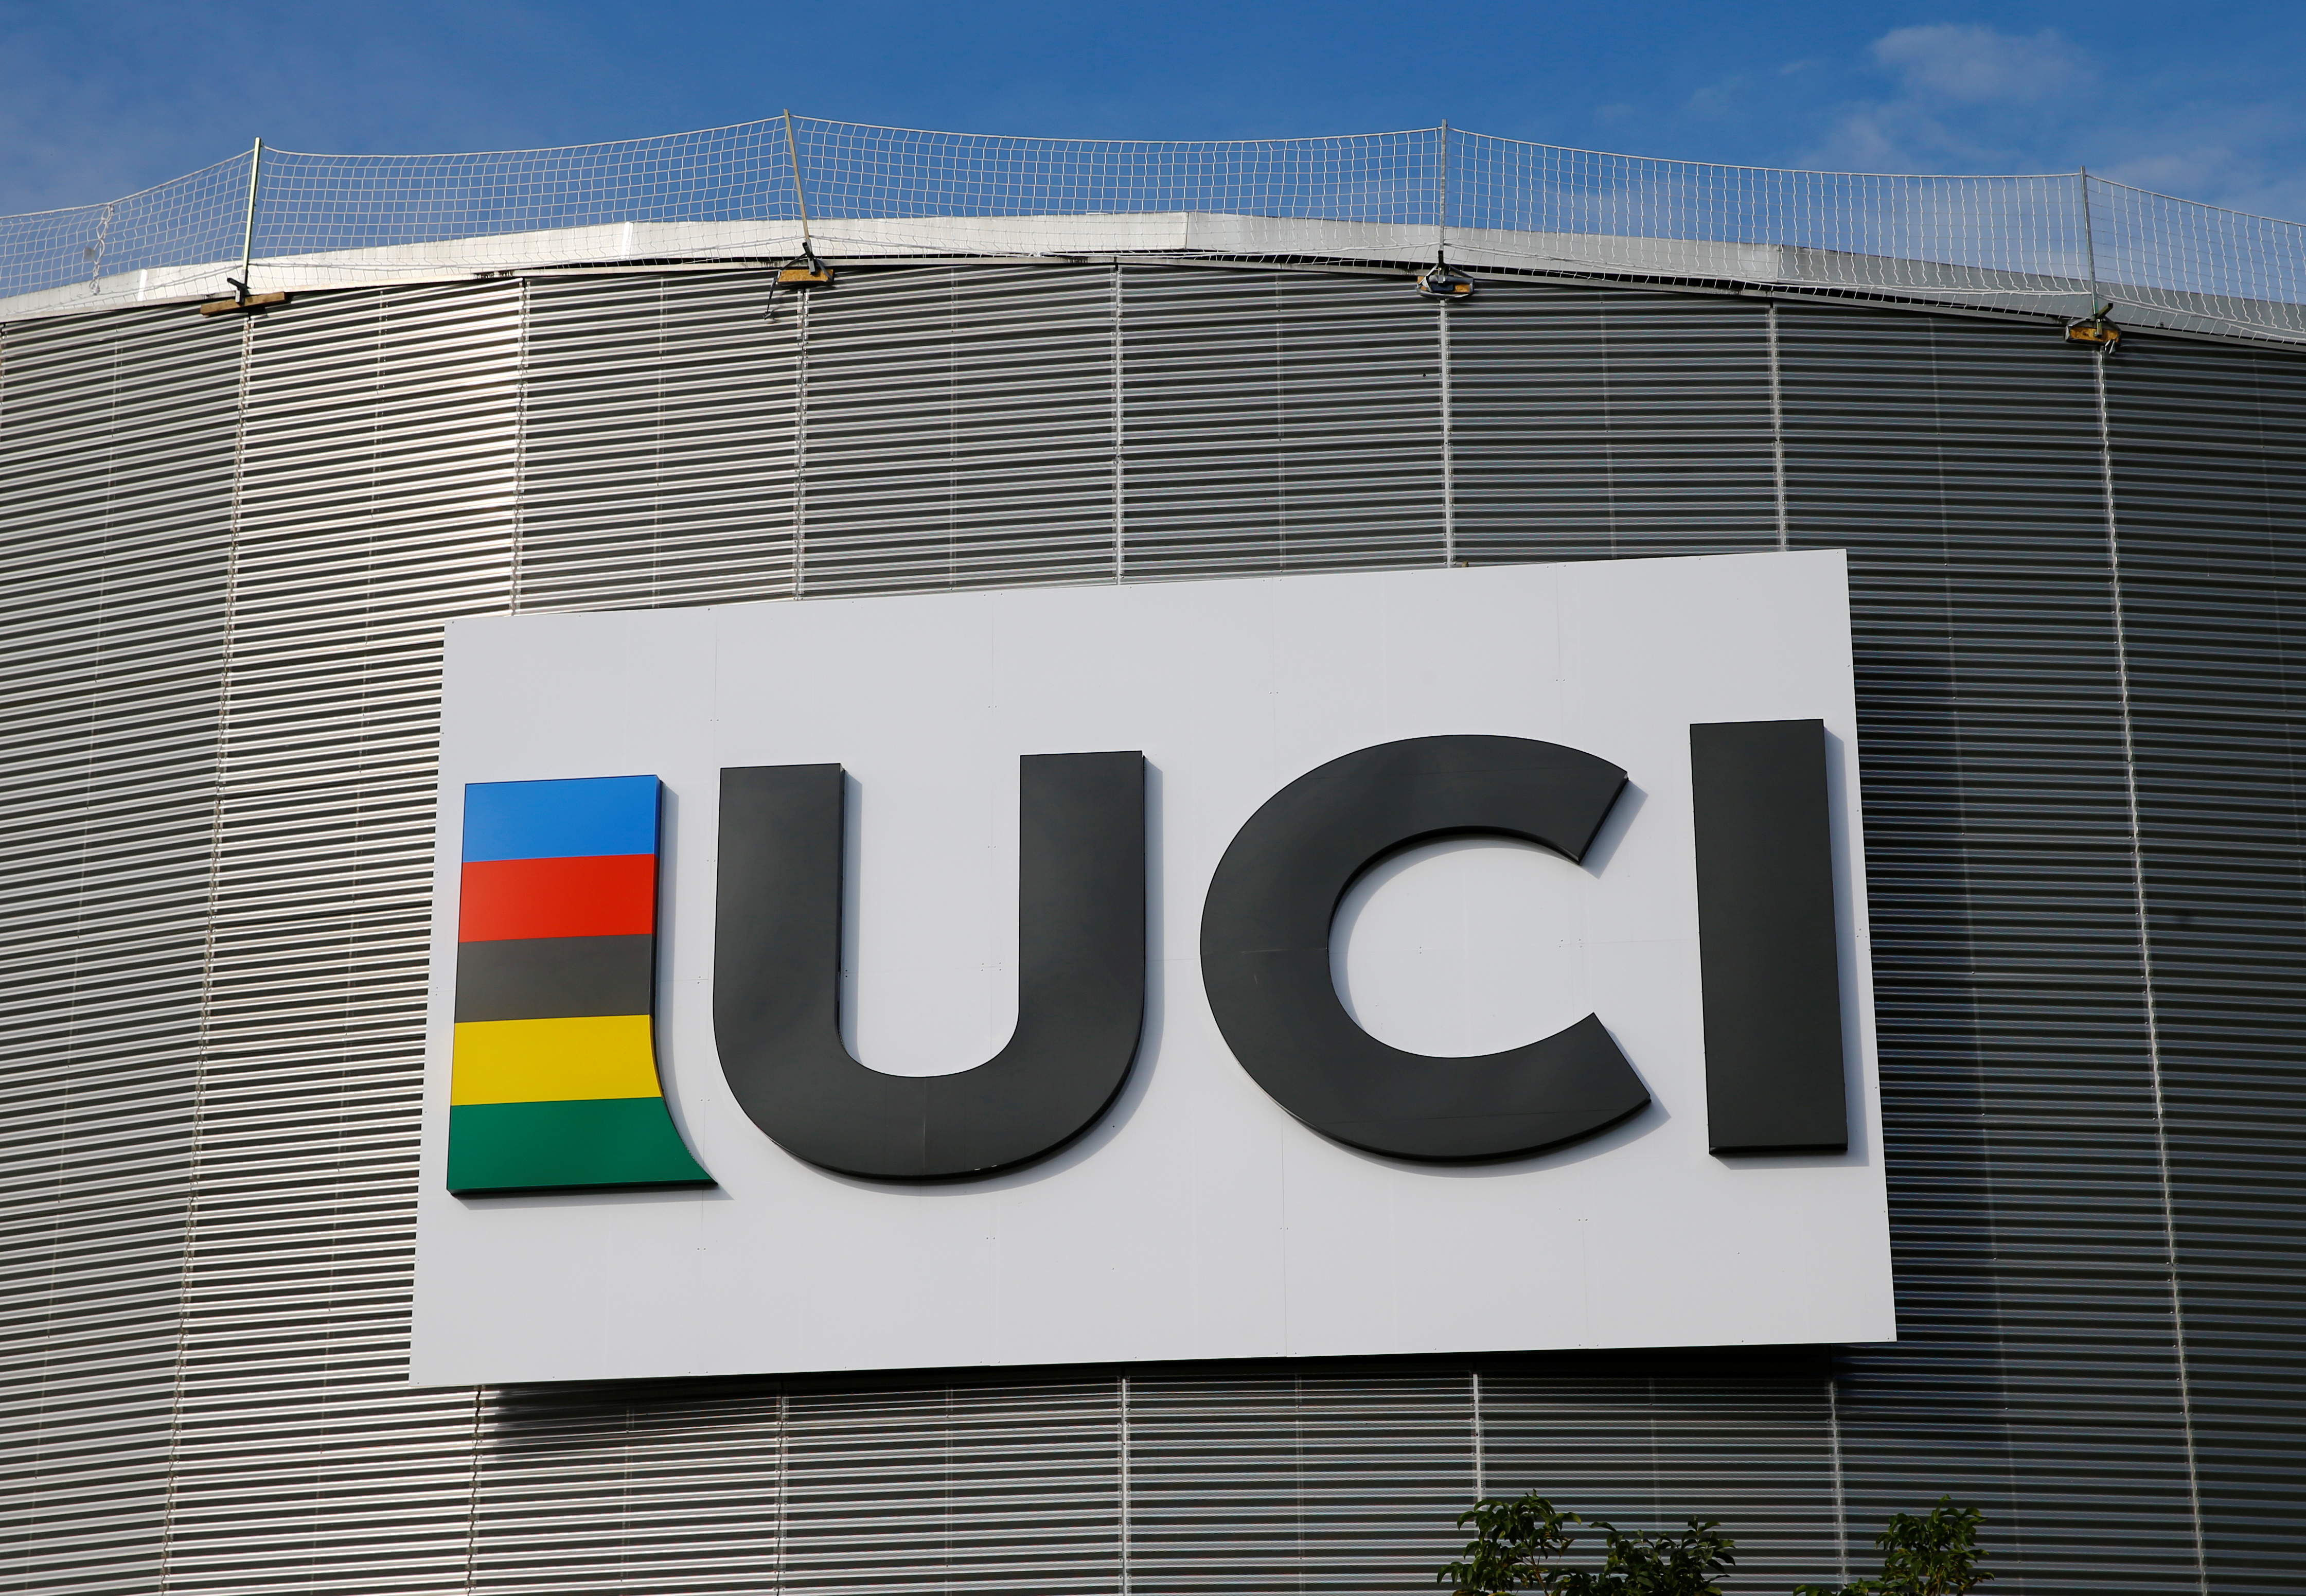 A logo is pictured on the indoor track at the International Cycling Union (UCI) Federation headquarters in Aigle